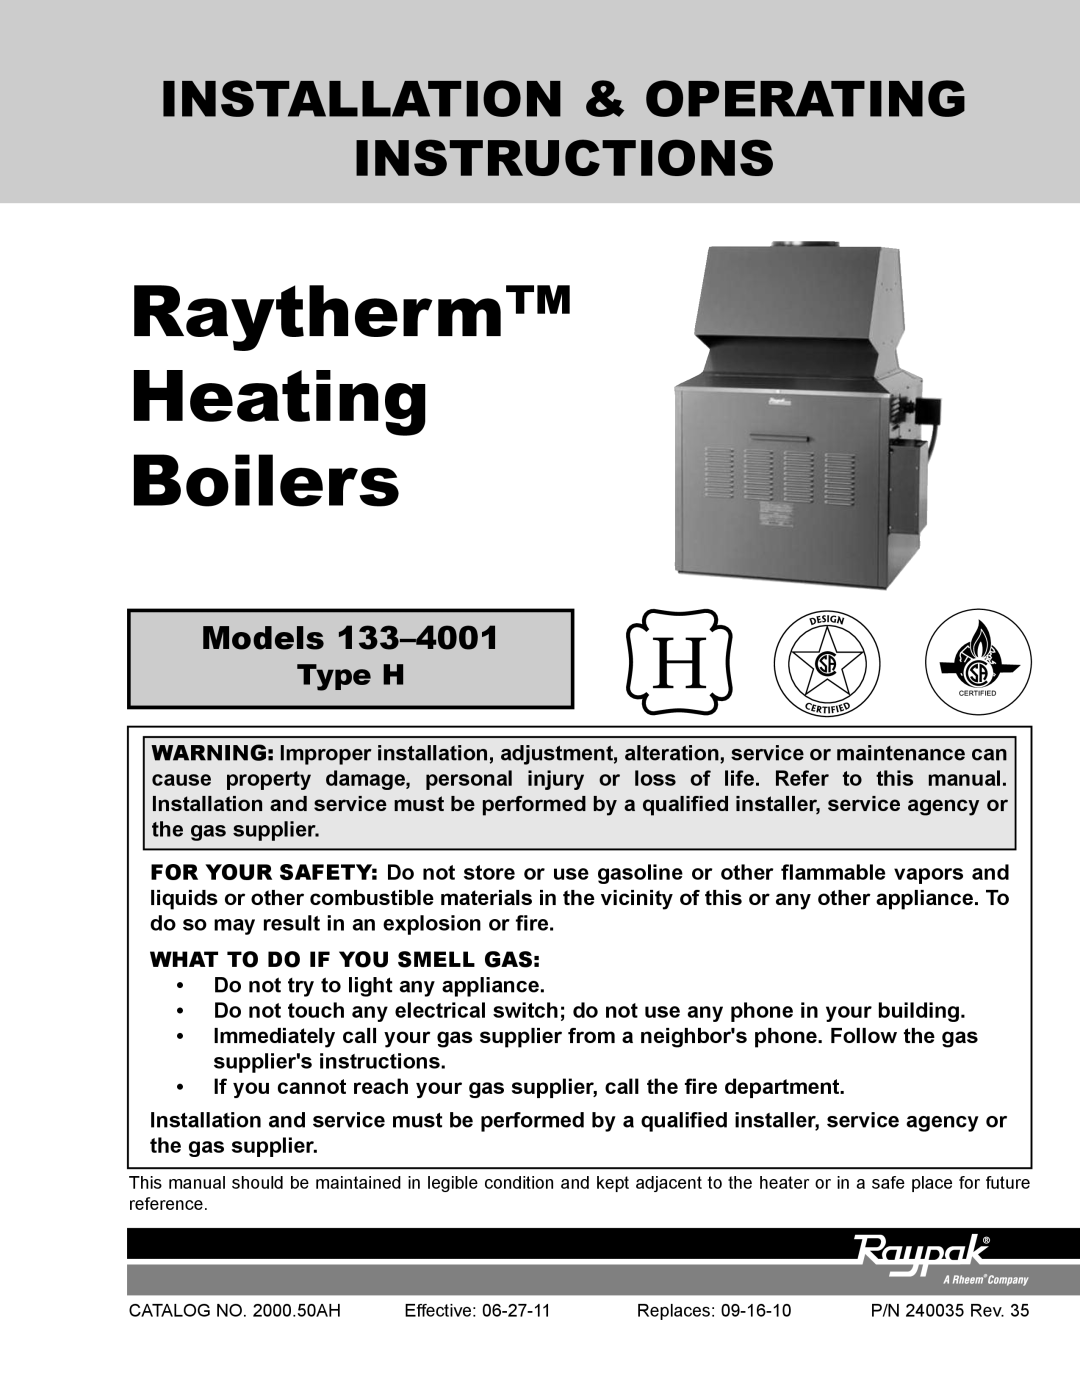 Raypak 133-4001 manual Models, What To Do If You Smell Gas, Do not try to light any appliance, Raytherm Heating Boilers 